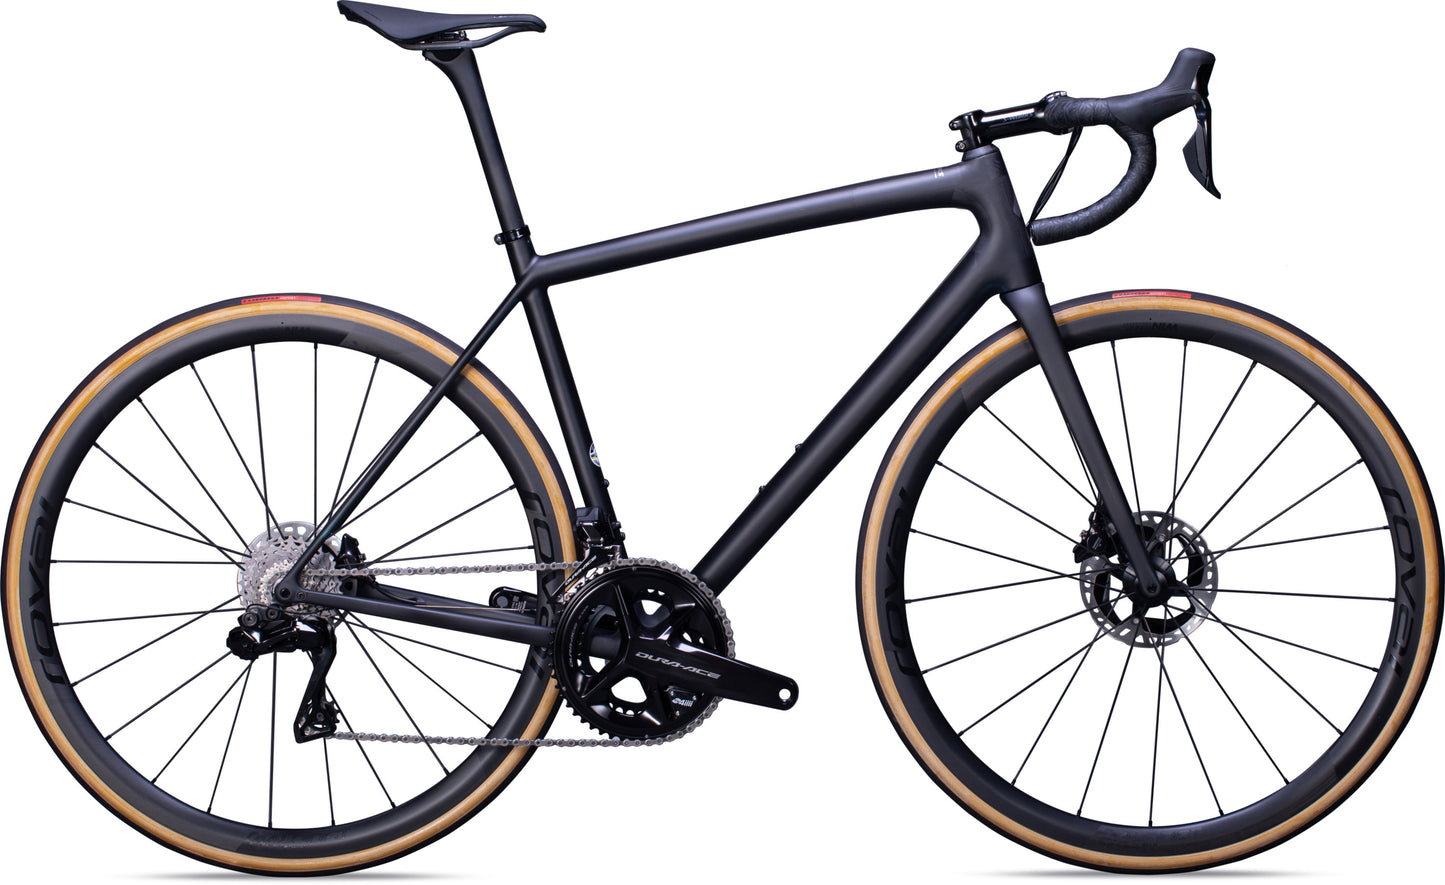 2022 S-Works Aethos - Dura-Ace Di2 12Spd